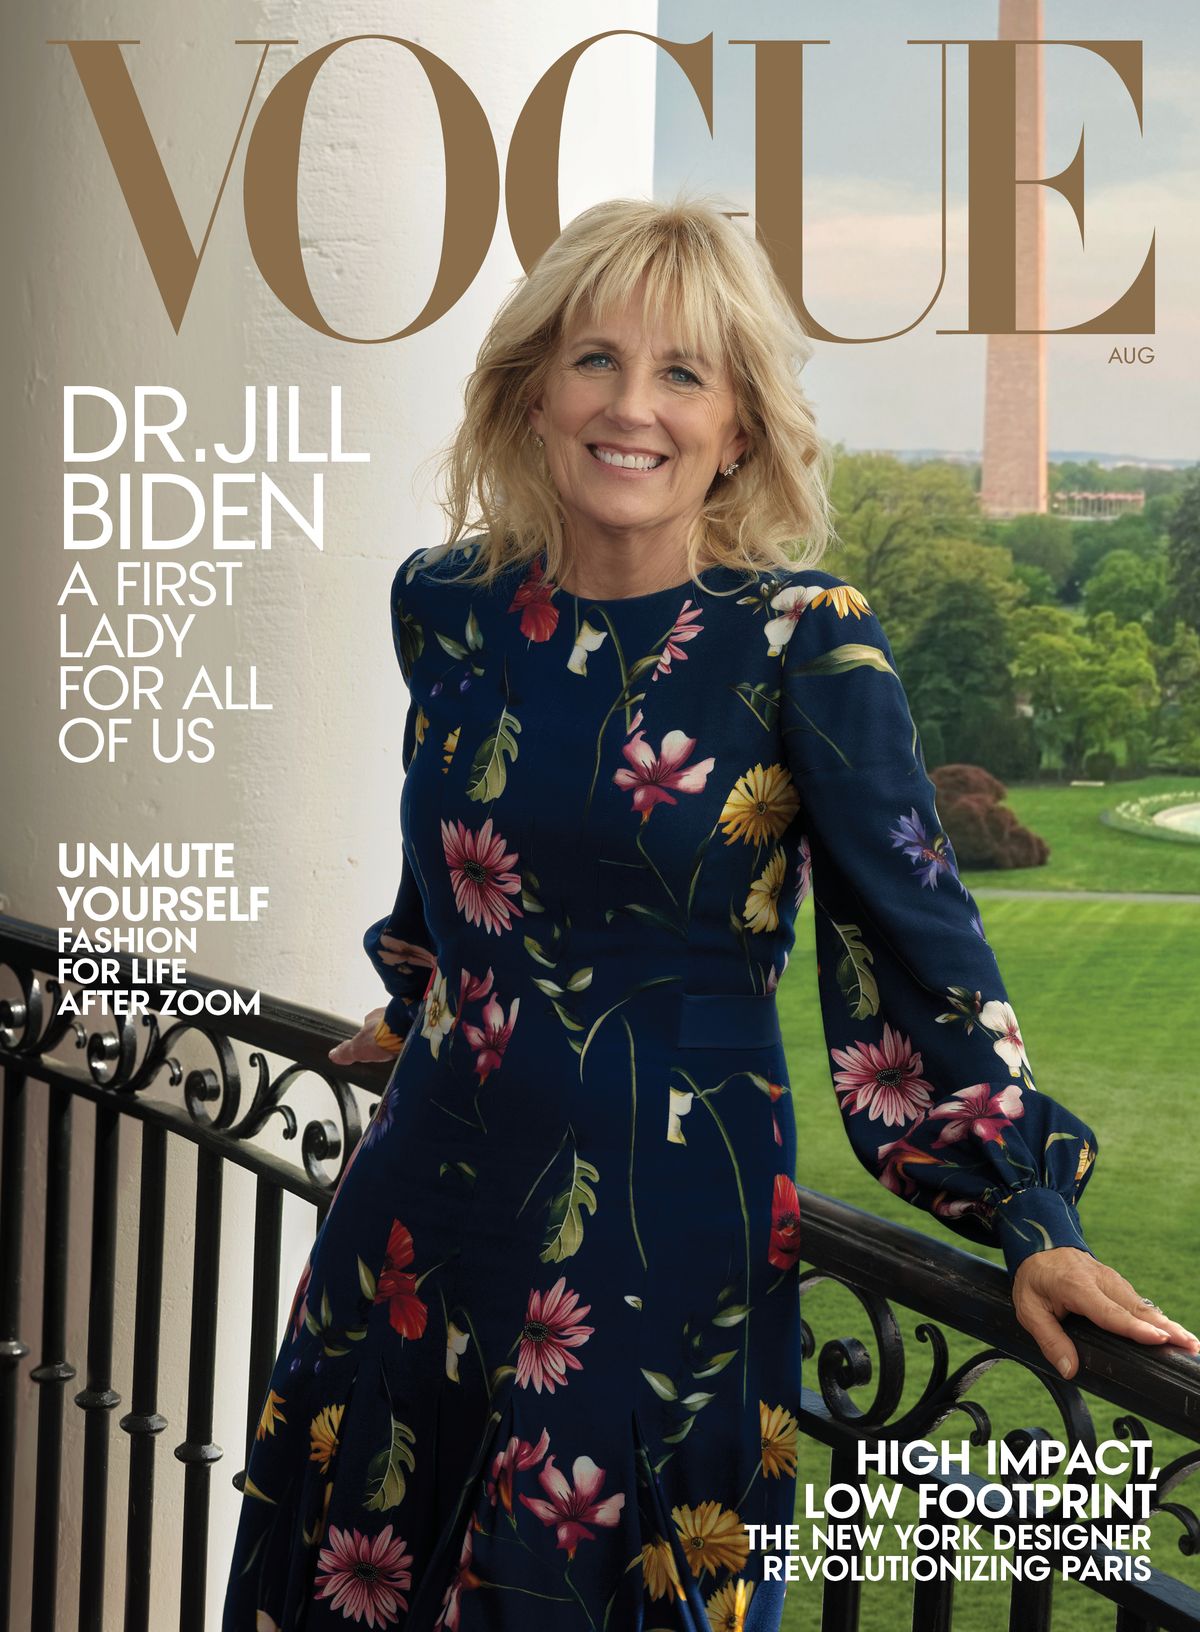 dr jill biden on the cover of vogue's august 2021 issue, photographed at the white house